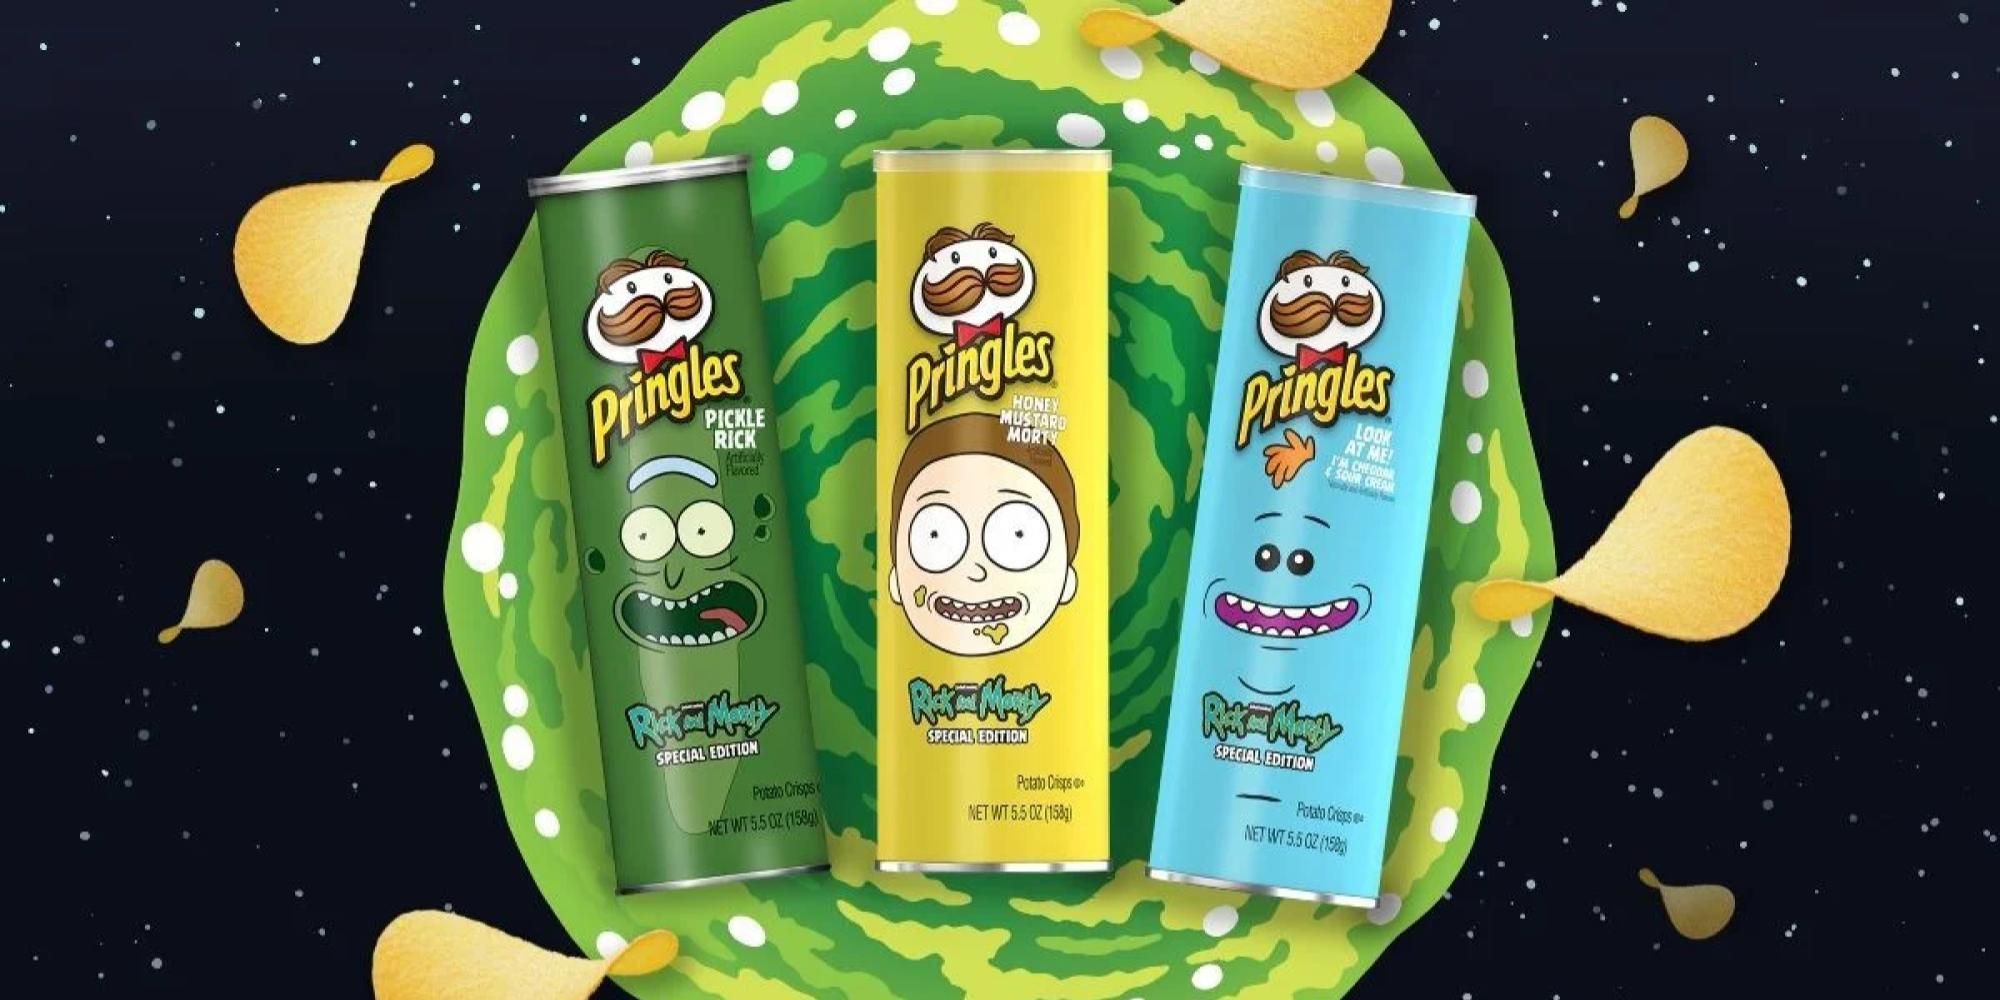 Pringles Announces Two New Rick & Morty Chip Flavors